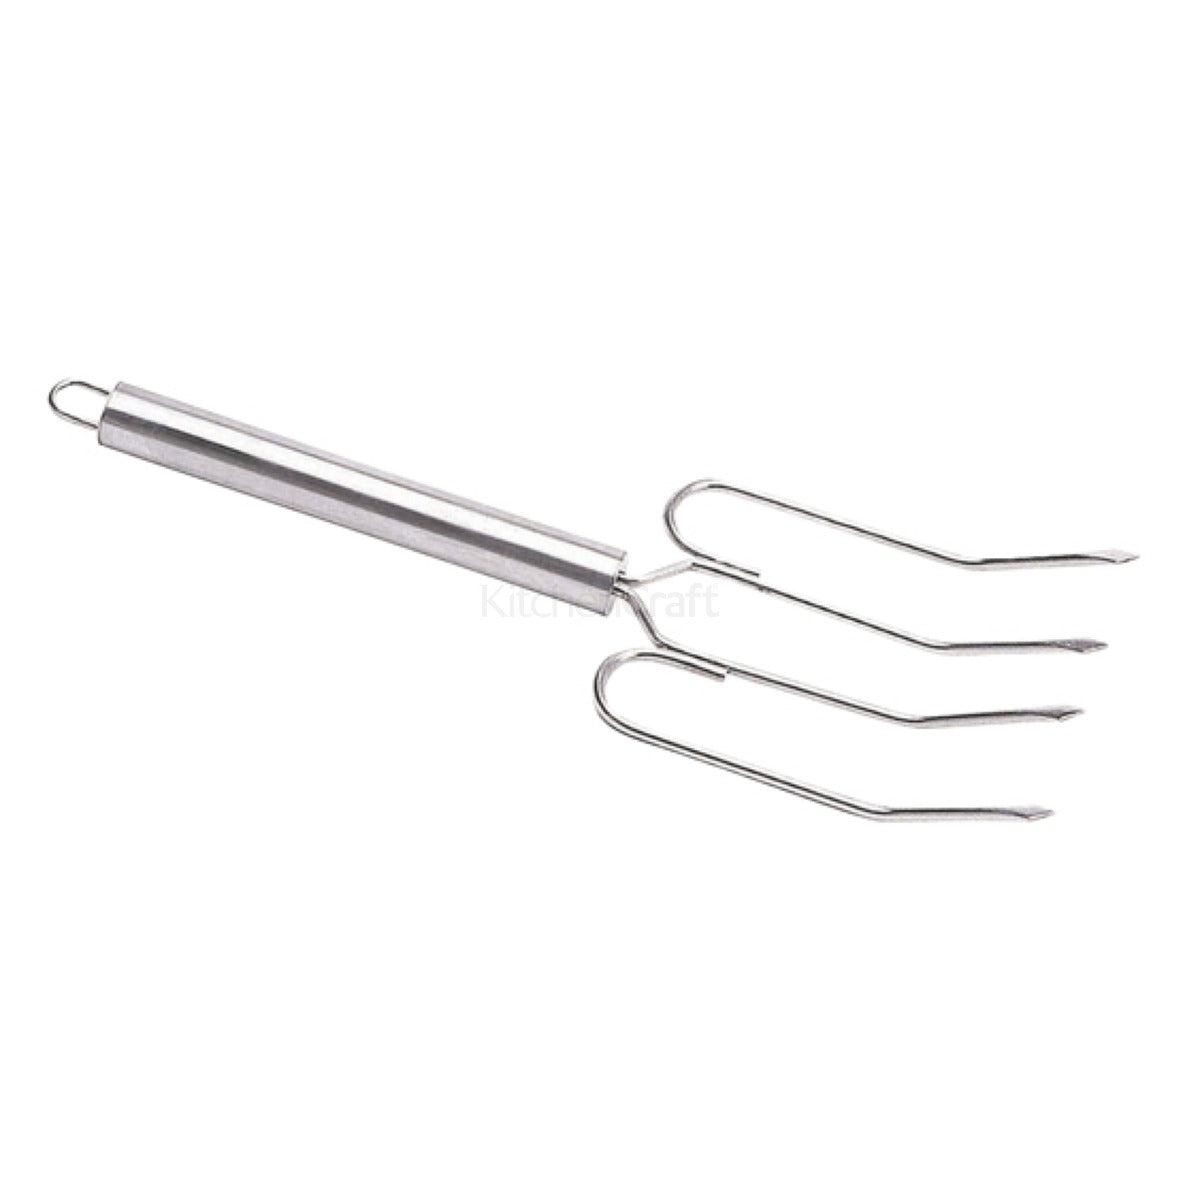 MasterClass Stainless Steel Oven Forks Pair